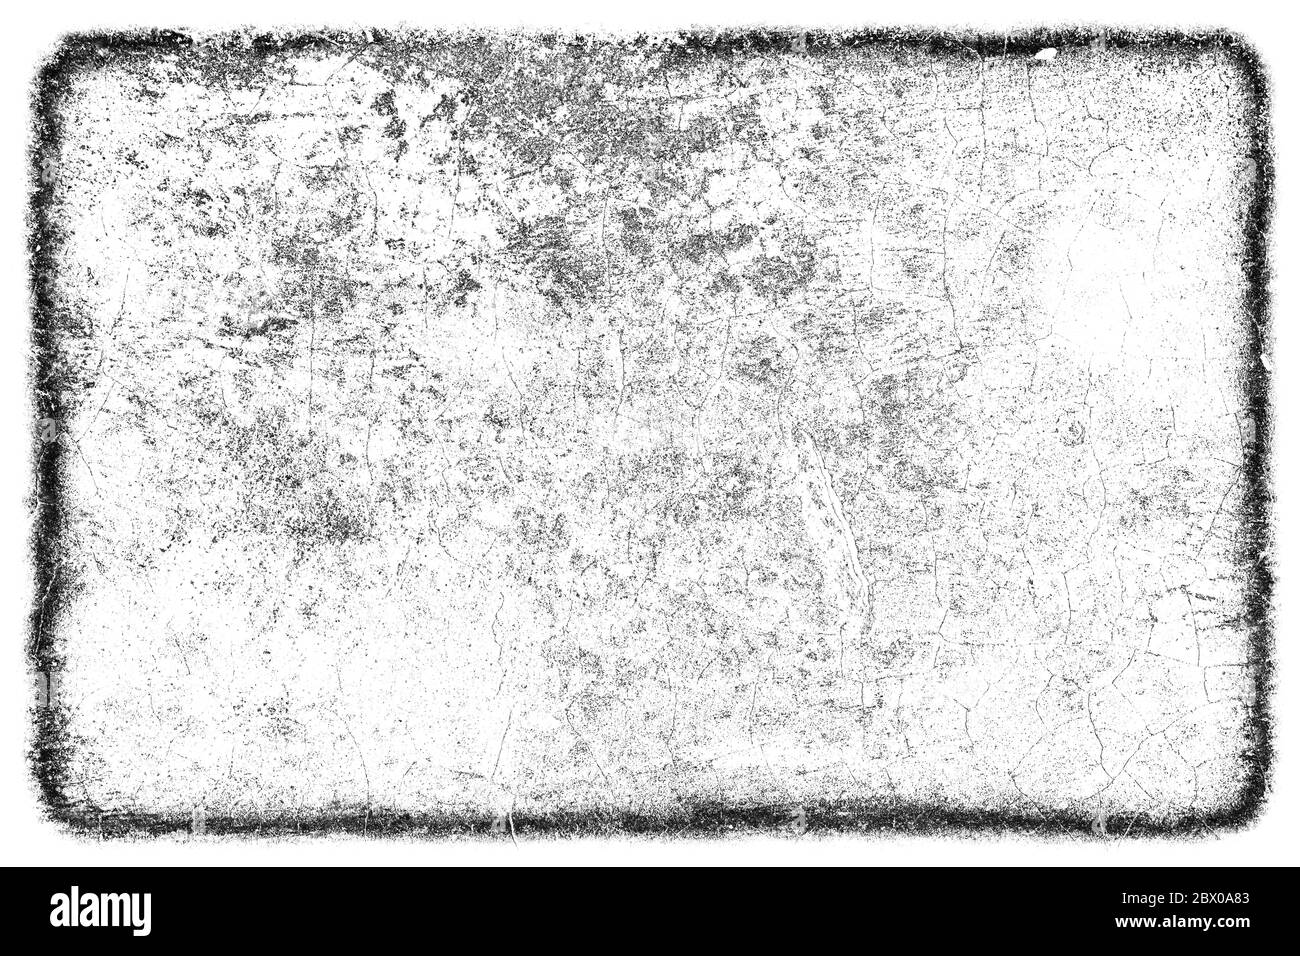 Grunge black and white urban texture. Messy dust overlay distressed background Stock Photo